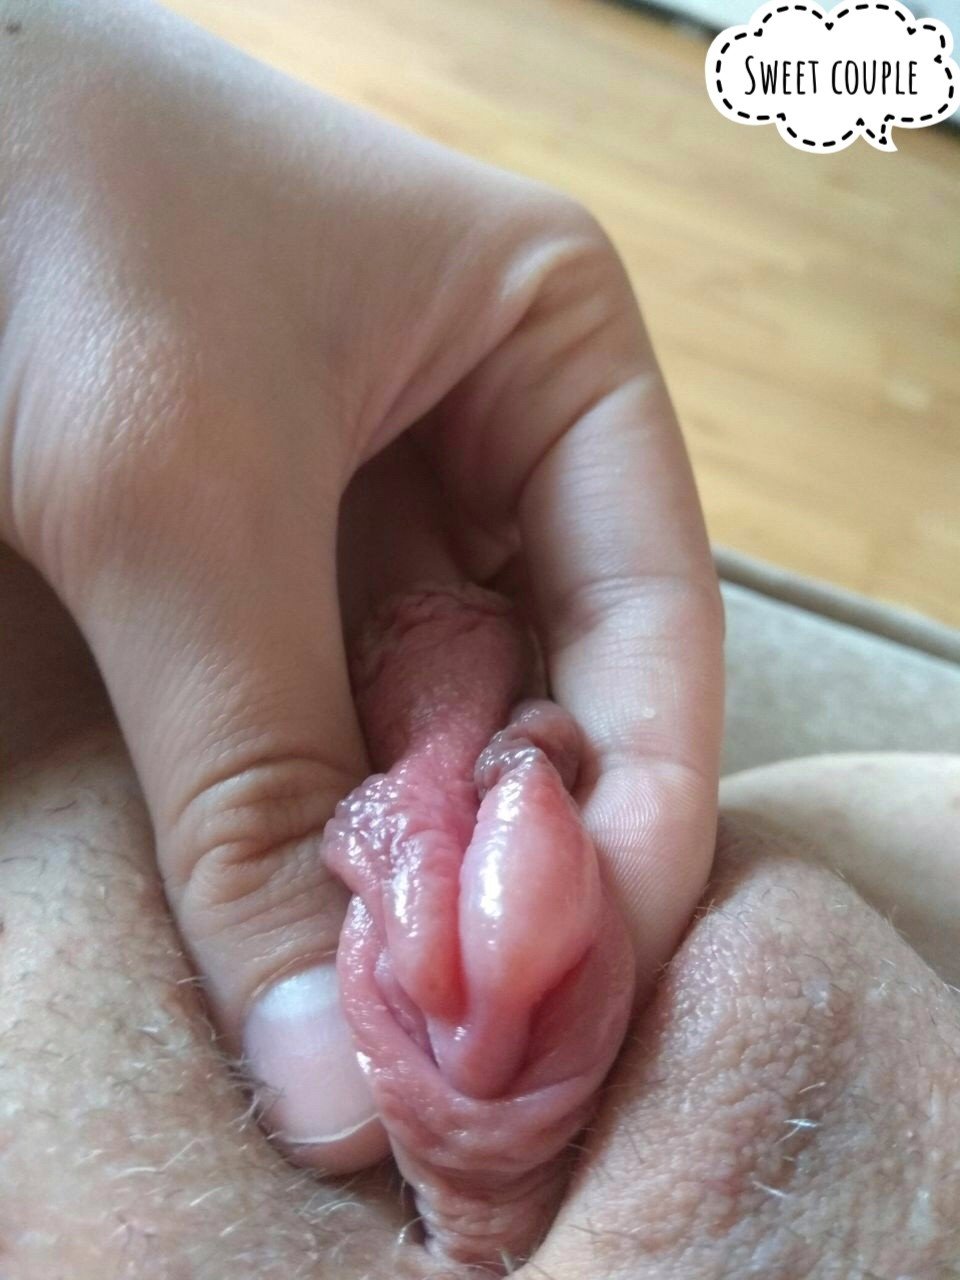 Photo by Sweet couple with the username @75kurilka,  September 6, 2020 at 6:47 AM. The post is about the topic Love tricks and the text says 'after the pump
#pumping #pussypump #mypussy #bigpussy'